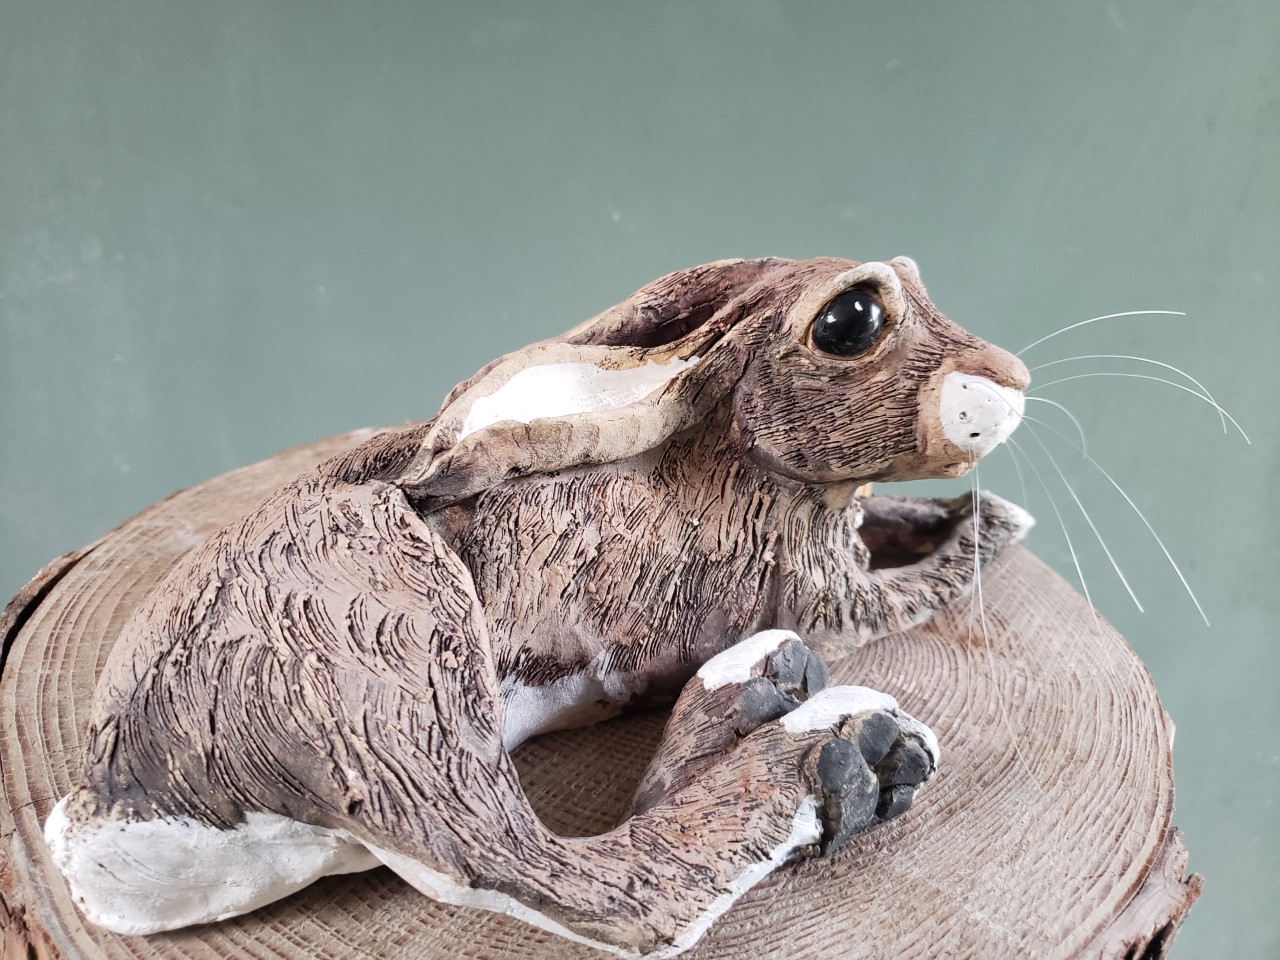 Big Footed Resting Hare Workshop on Saturday 1st October at Clifton Village Hall, Otley.